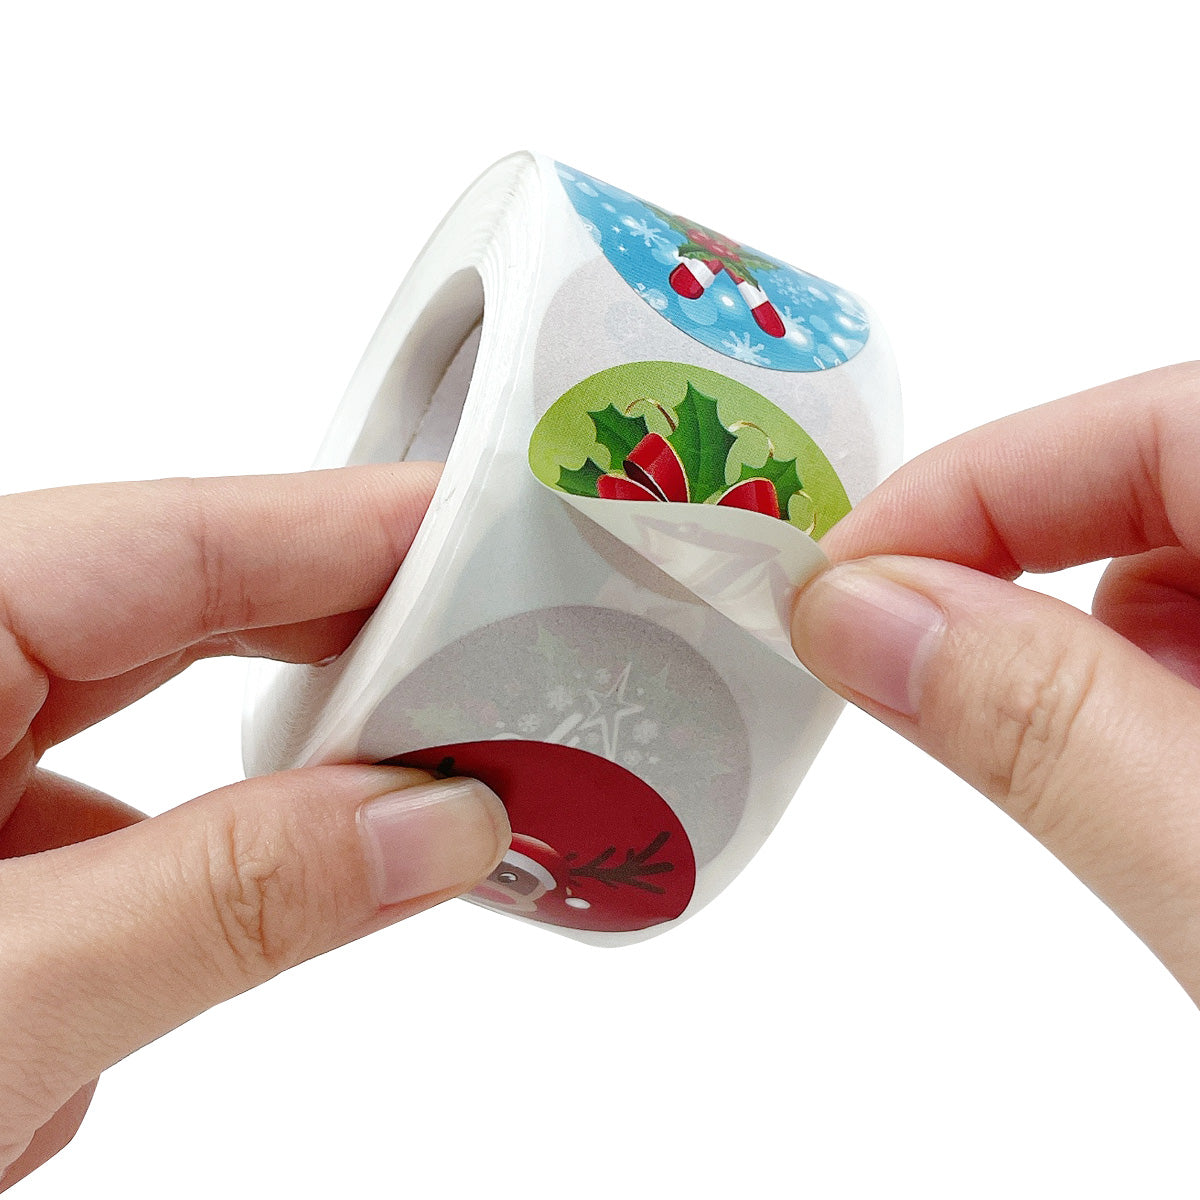 Wrapables Christmas Stickers Label Roll, Holiday Stickers for Sealing Cards, Envelopes, Gift Boxes, Festive Party Favors (500 Pcs) Festive